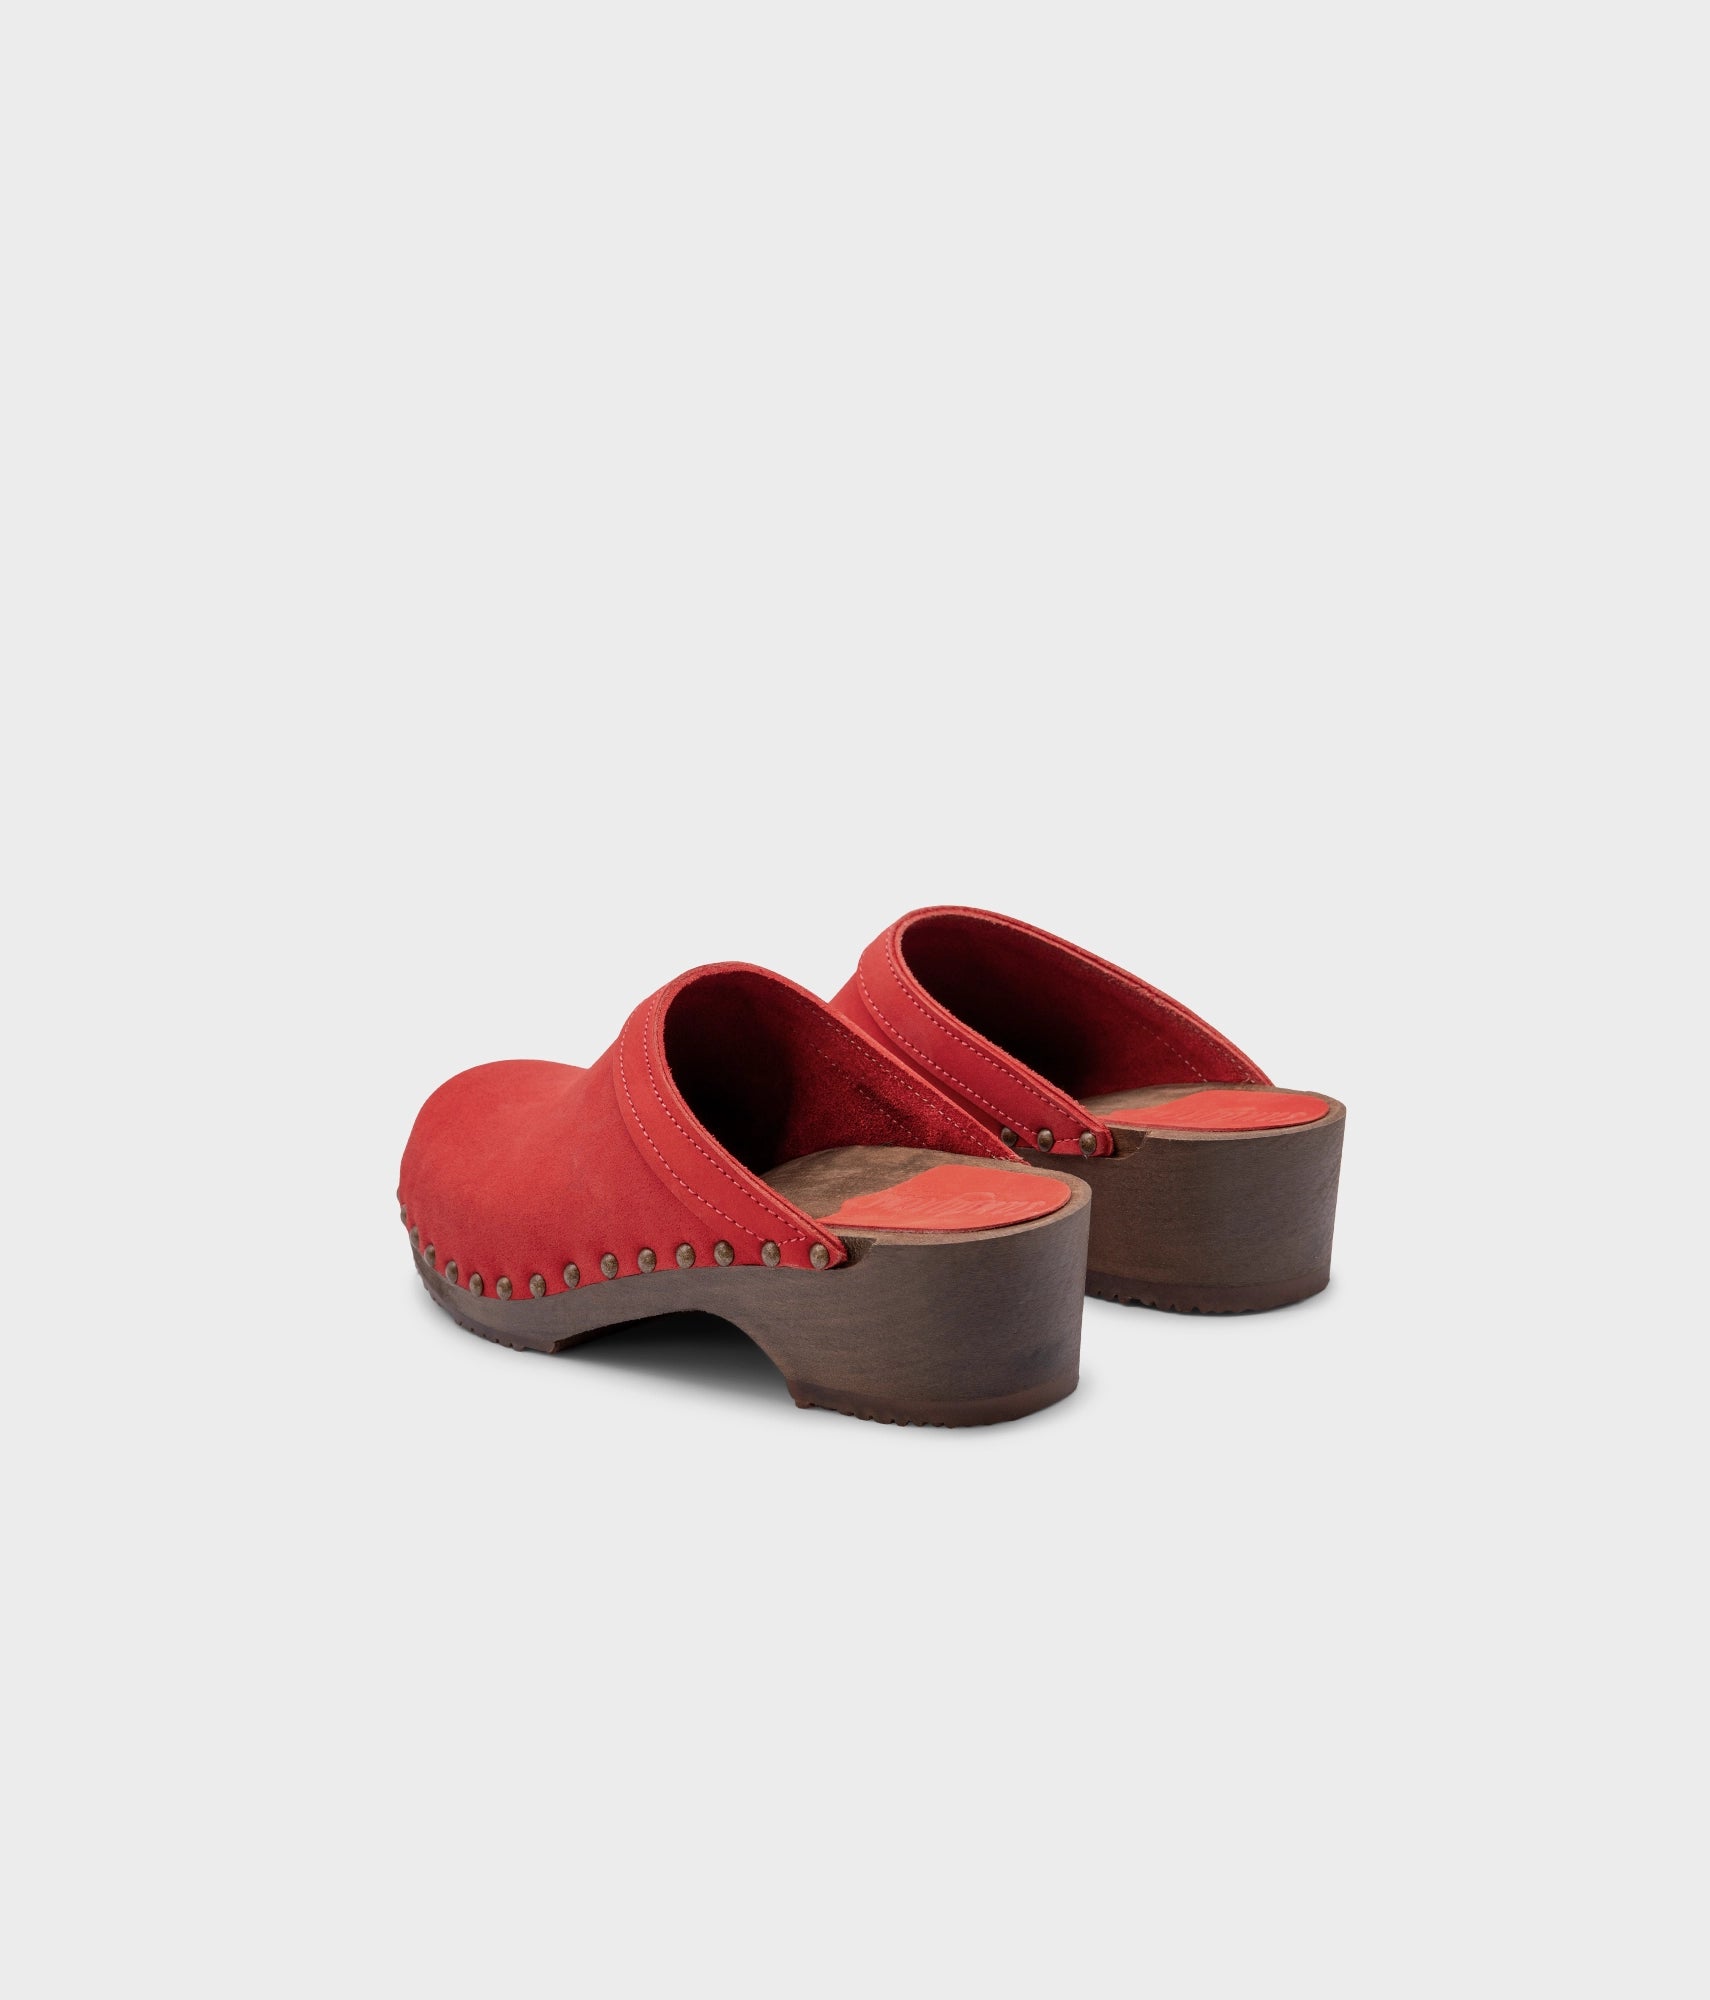 low heeled clog mules in red nubuck leather stapled on a dark wooden base with brass gold studs